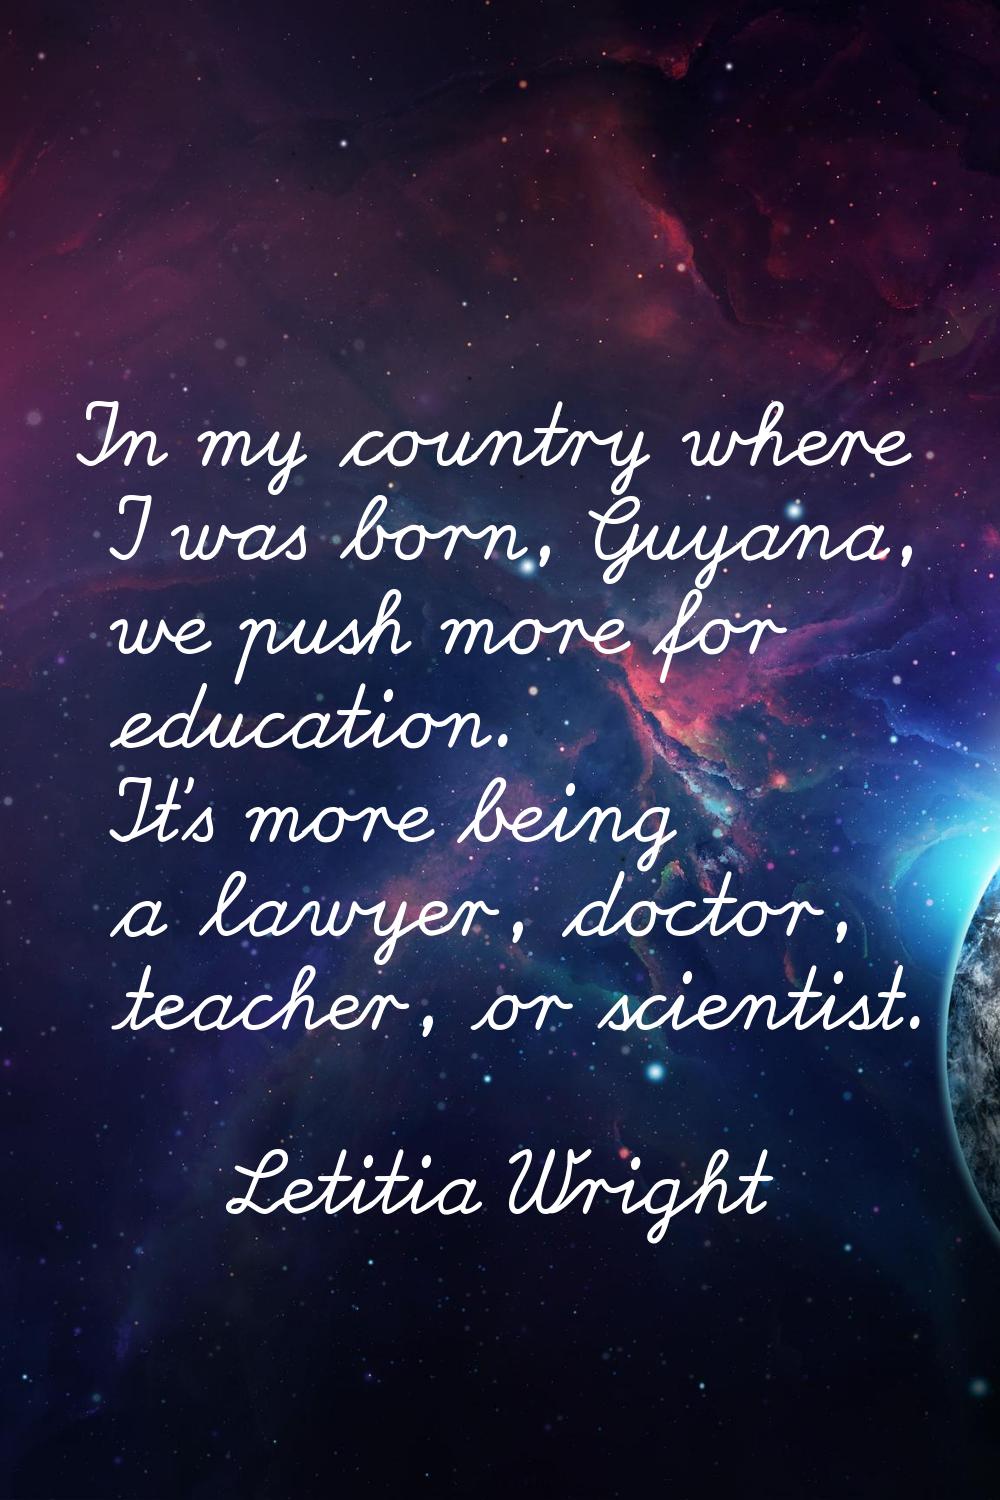 In my country where I was born, Guyana, we push more for education. It's more being a lawyer, docto